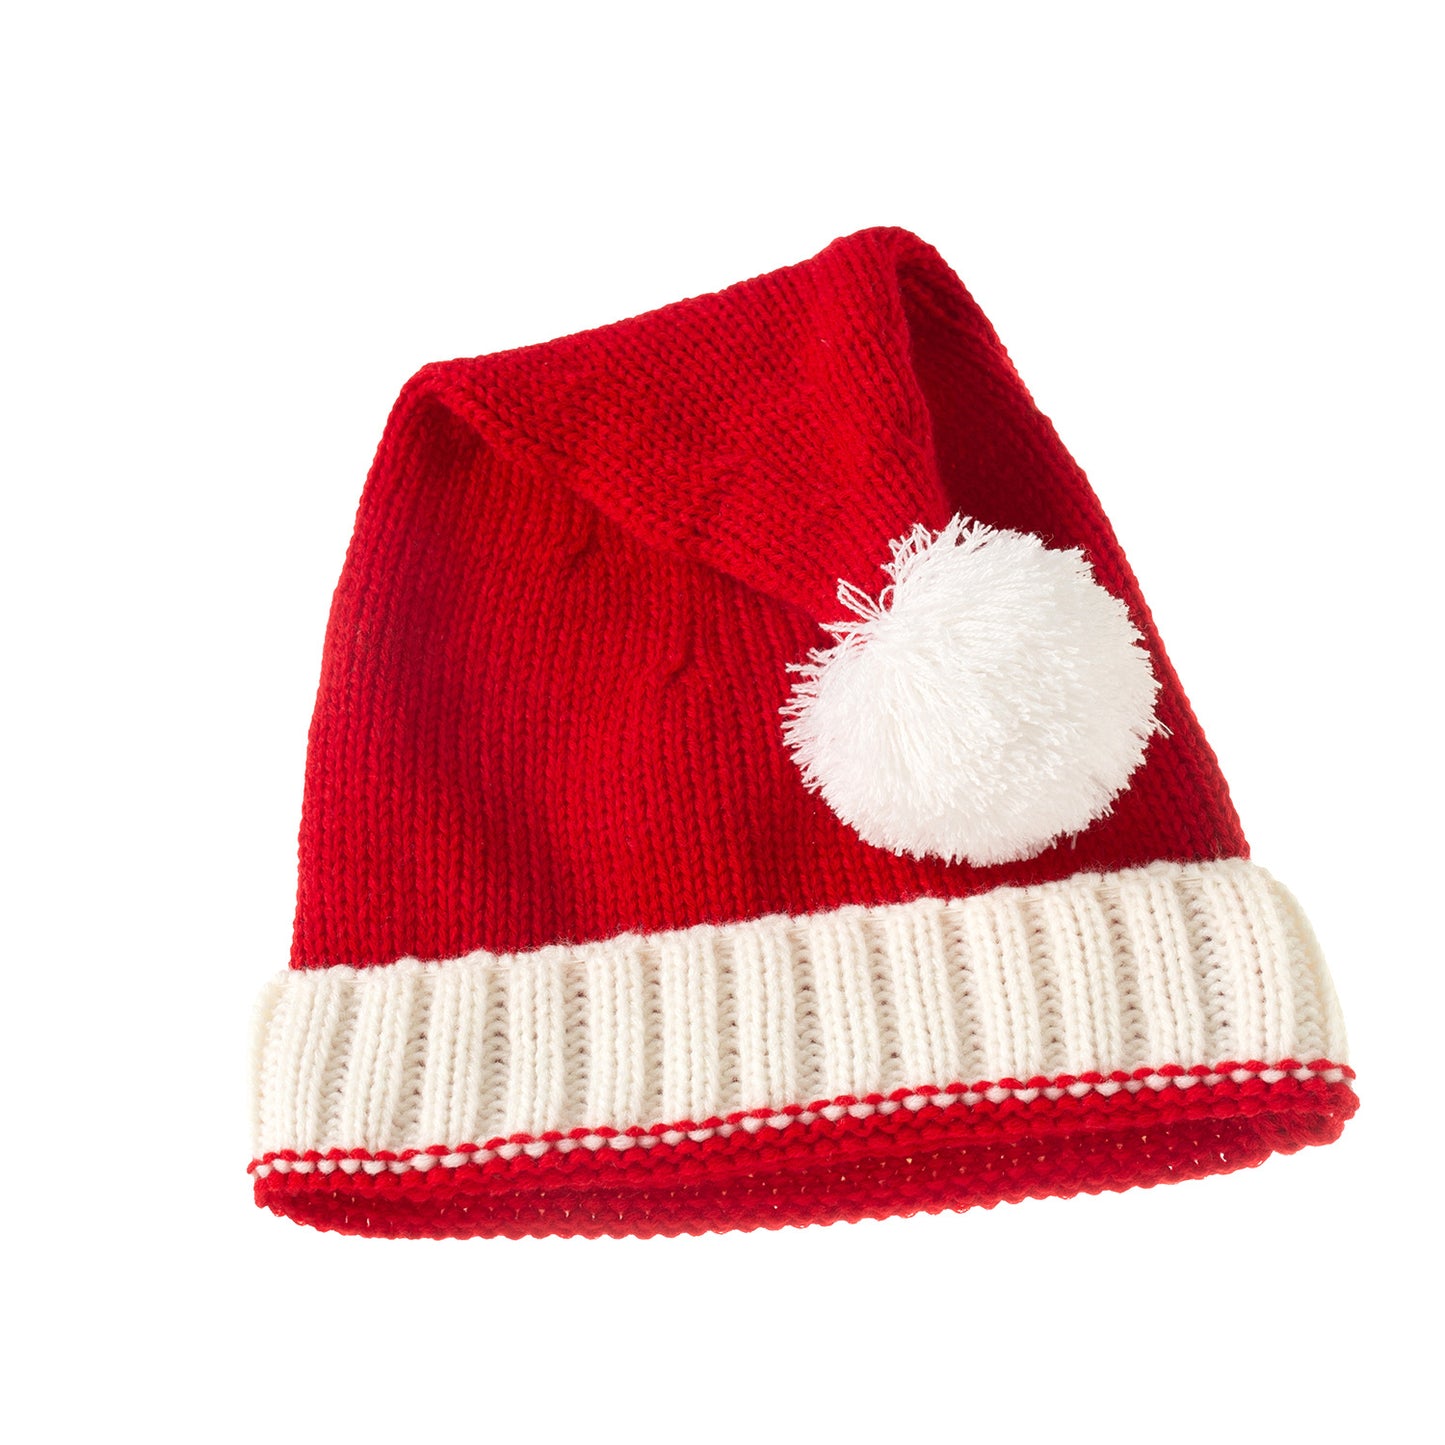 Christmas Parent-kids Red Knitted Warm Hats